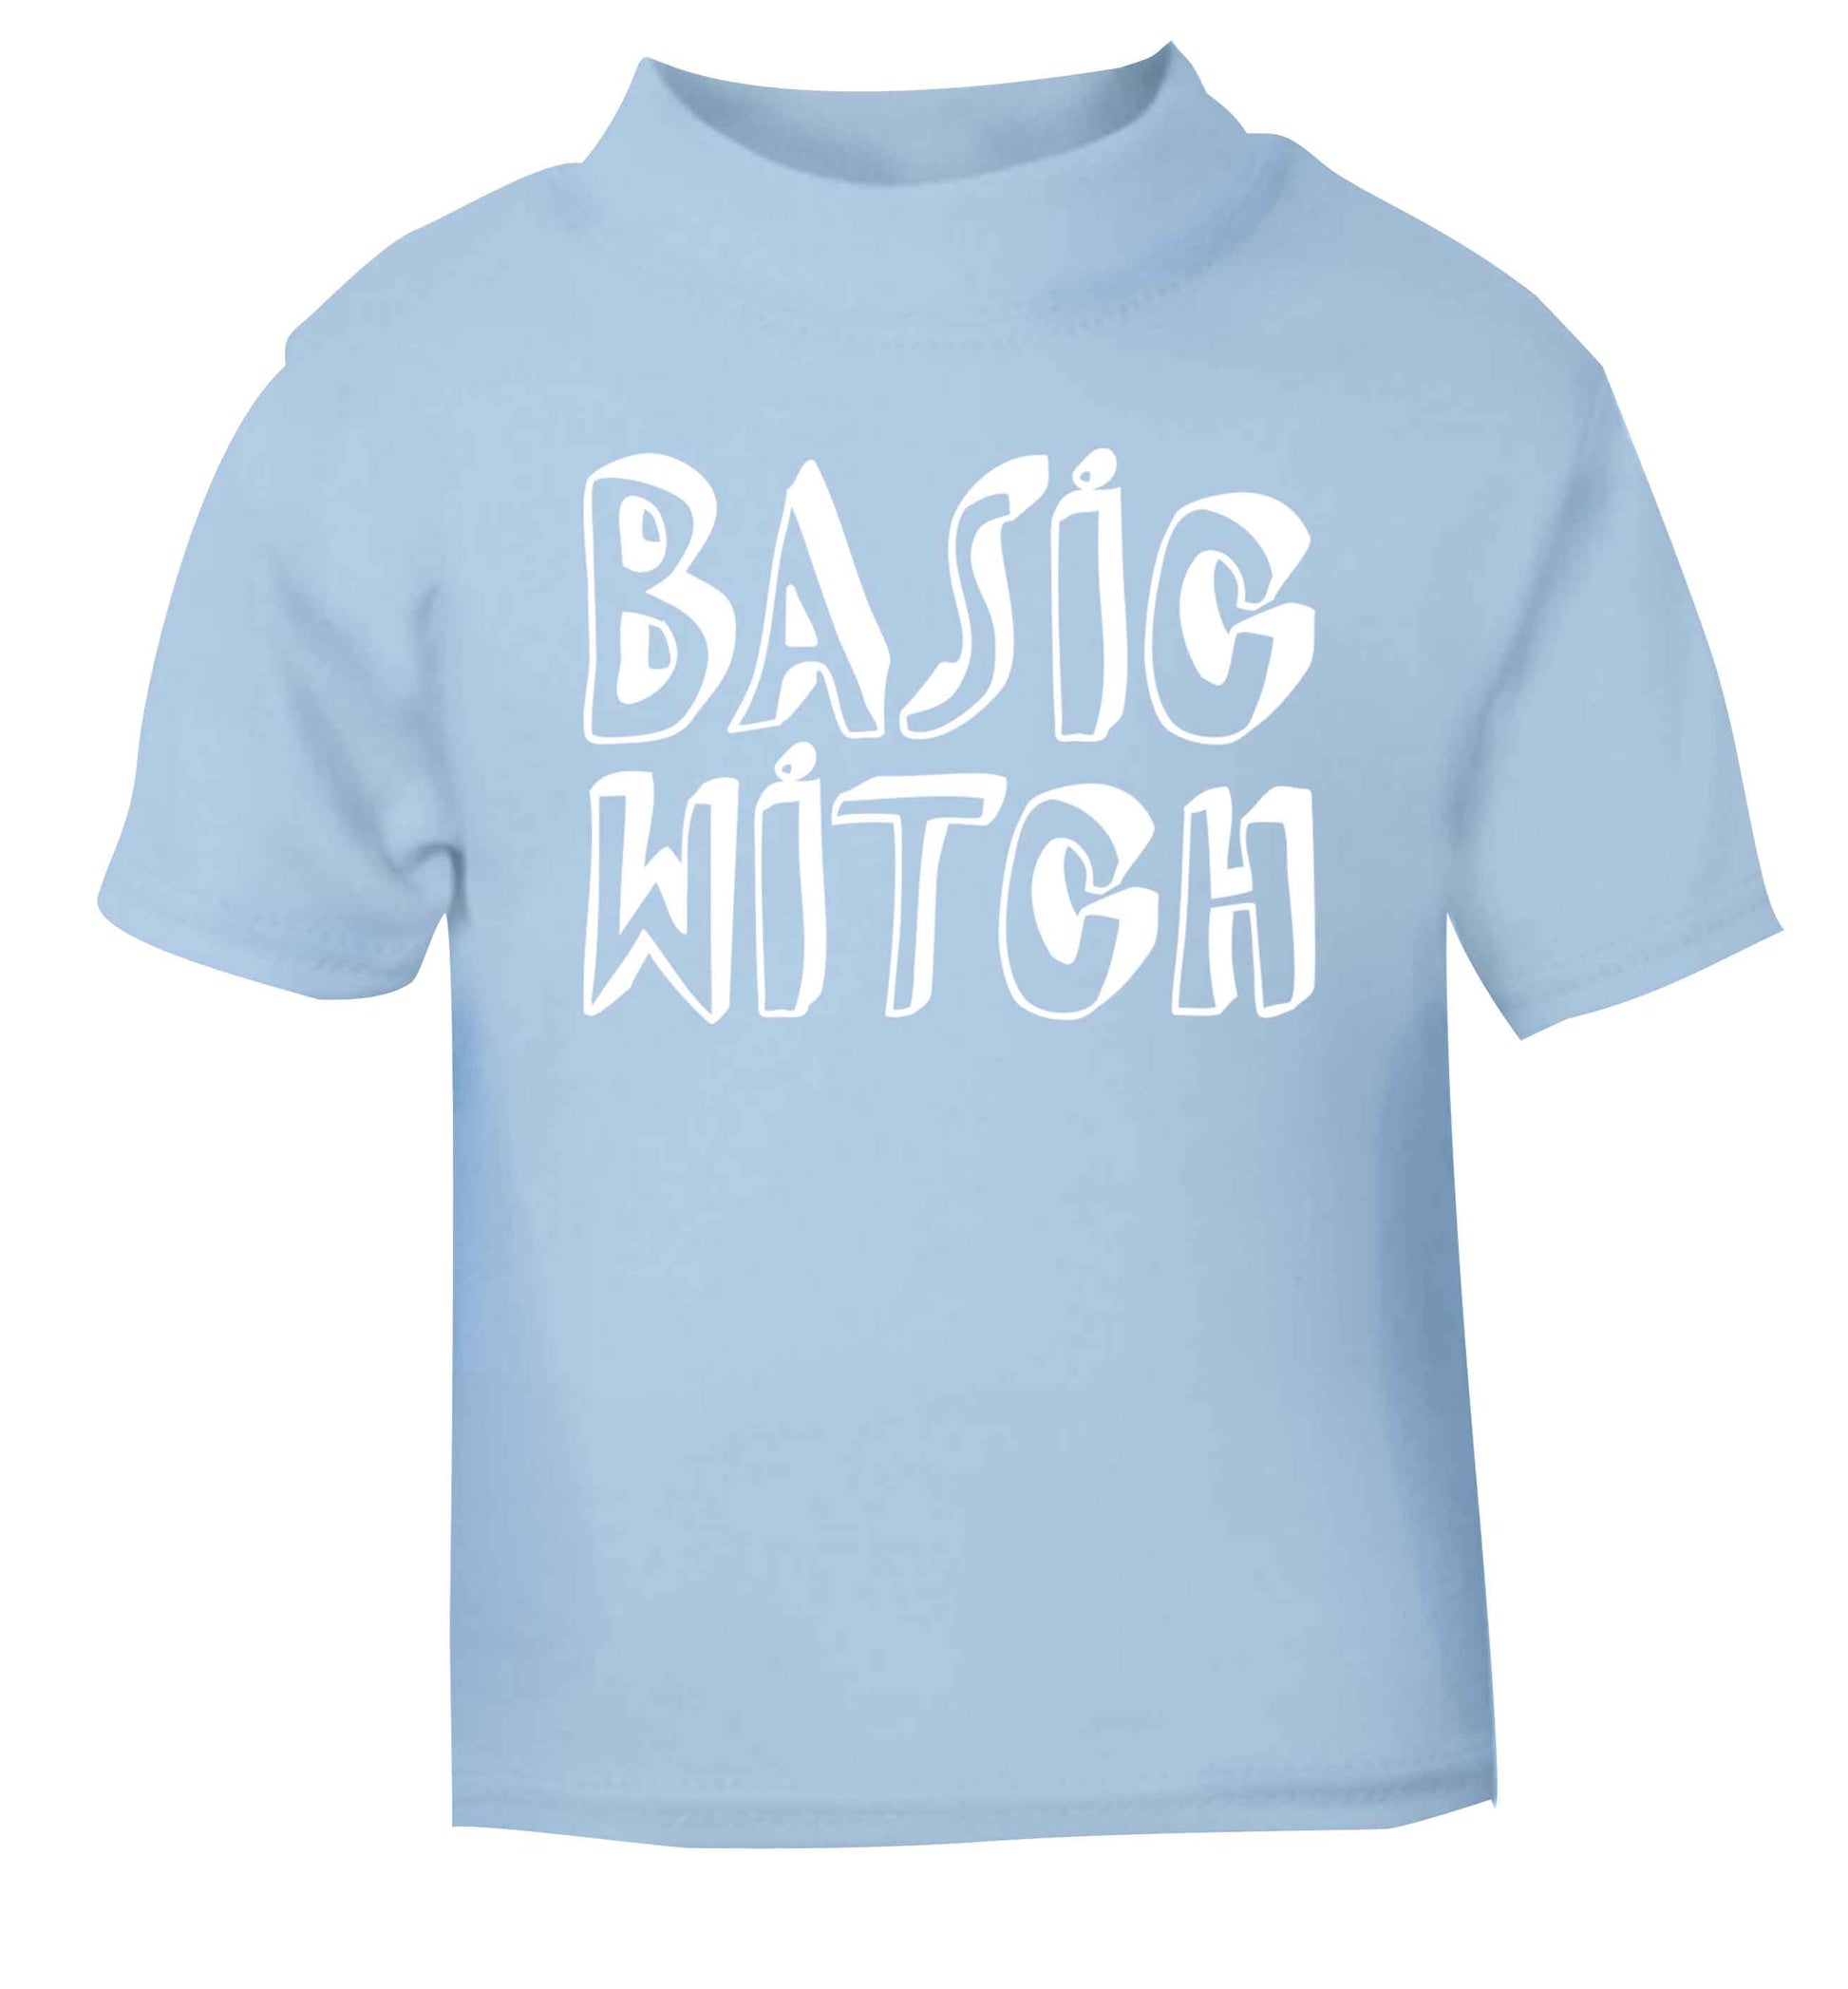 Basic witch light blue baby toddler Tshirt 2 Years